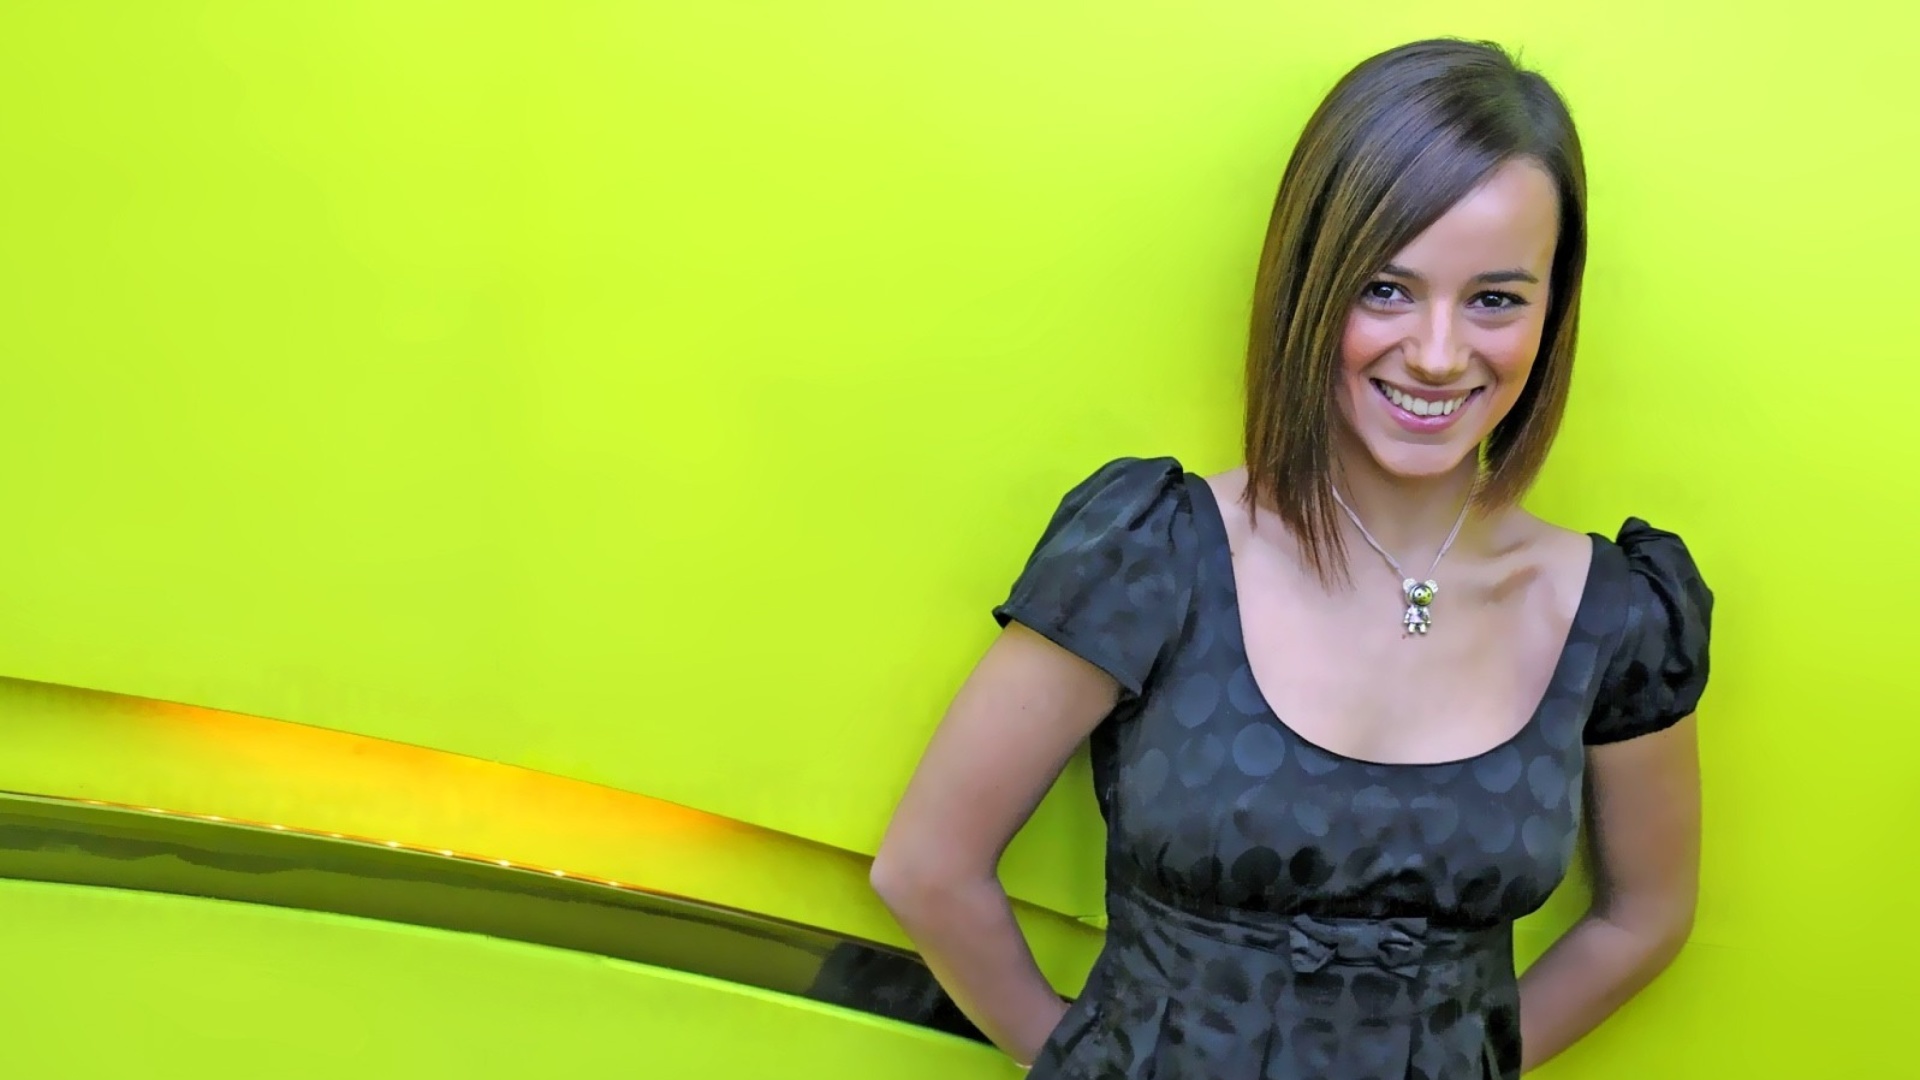 Alizee 4K wallpapers for your desktop or mobile screen 